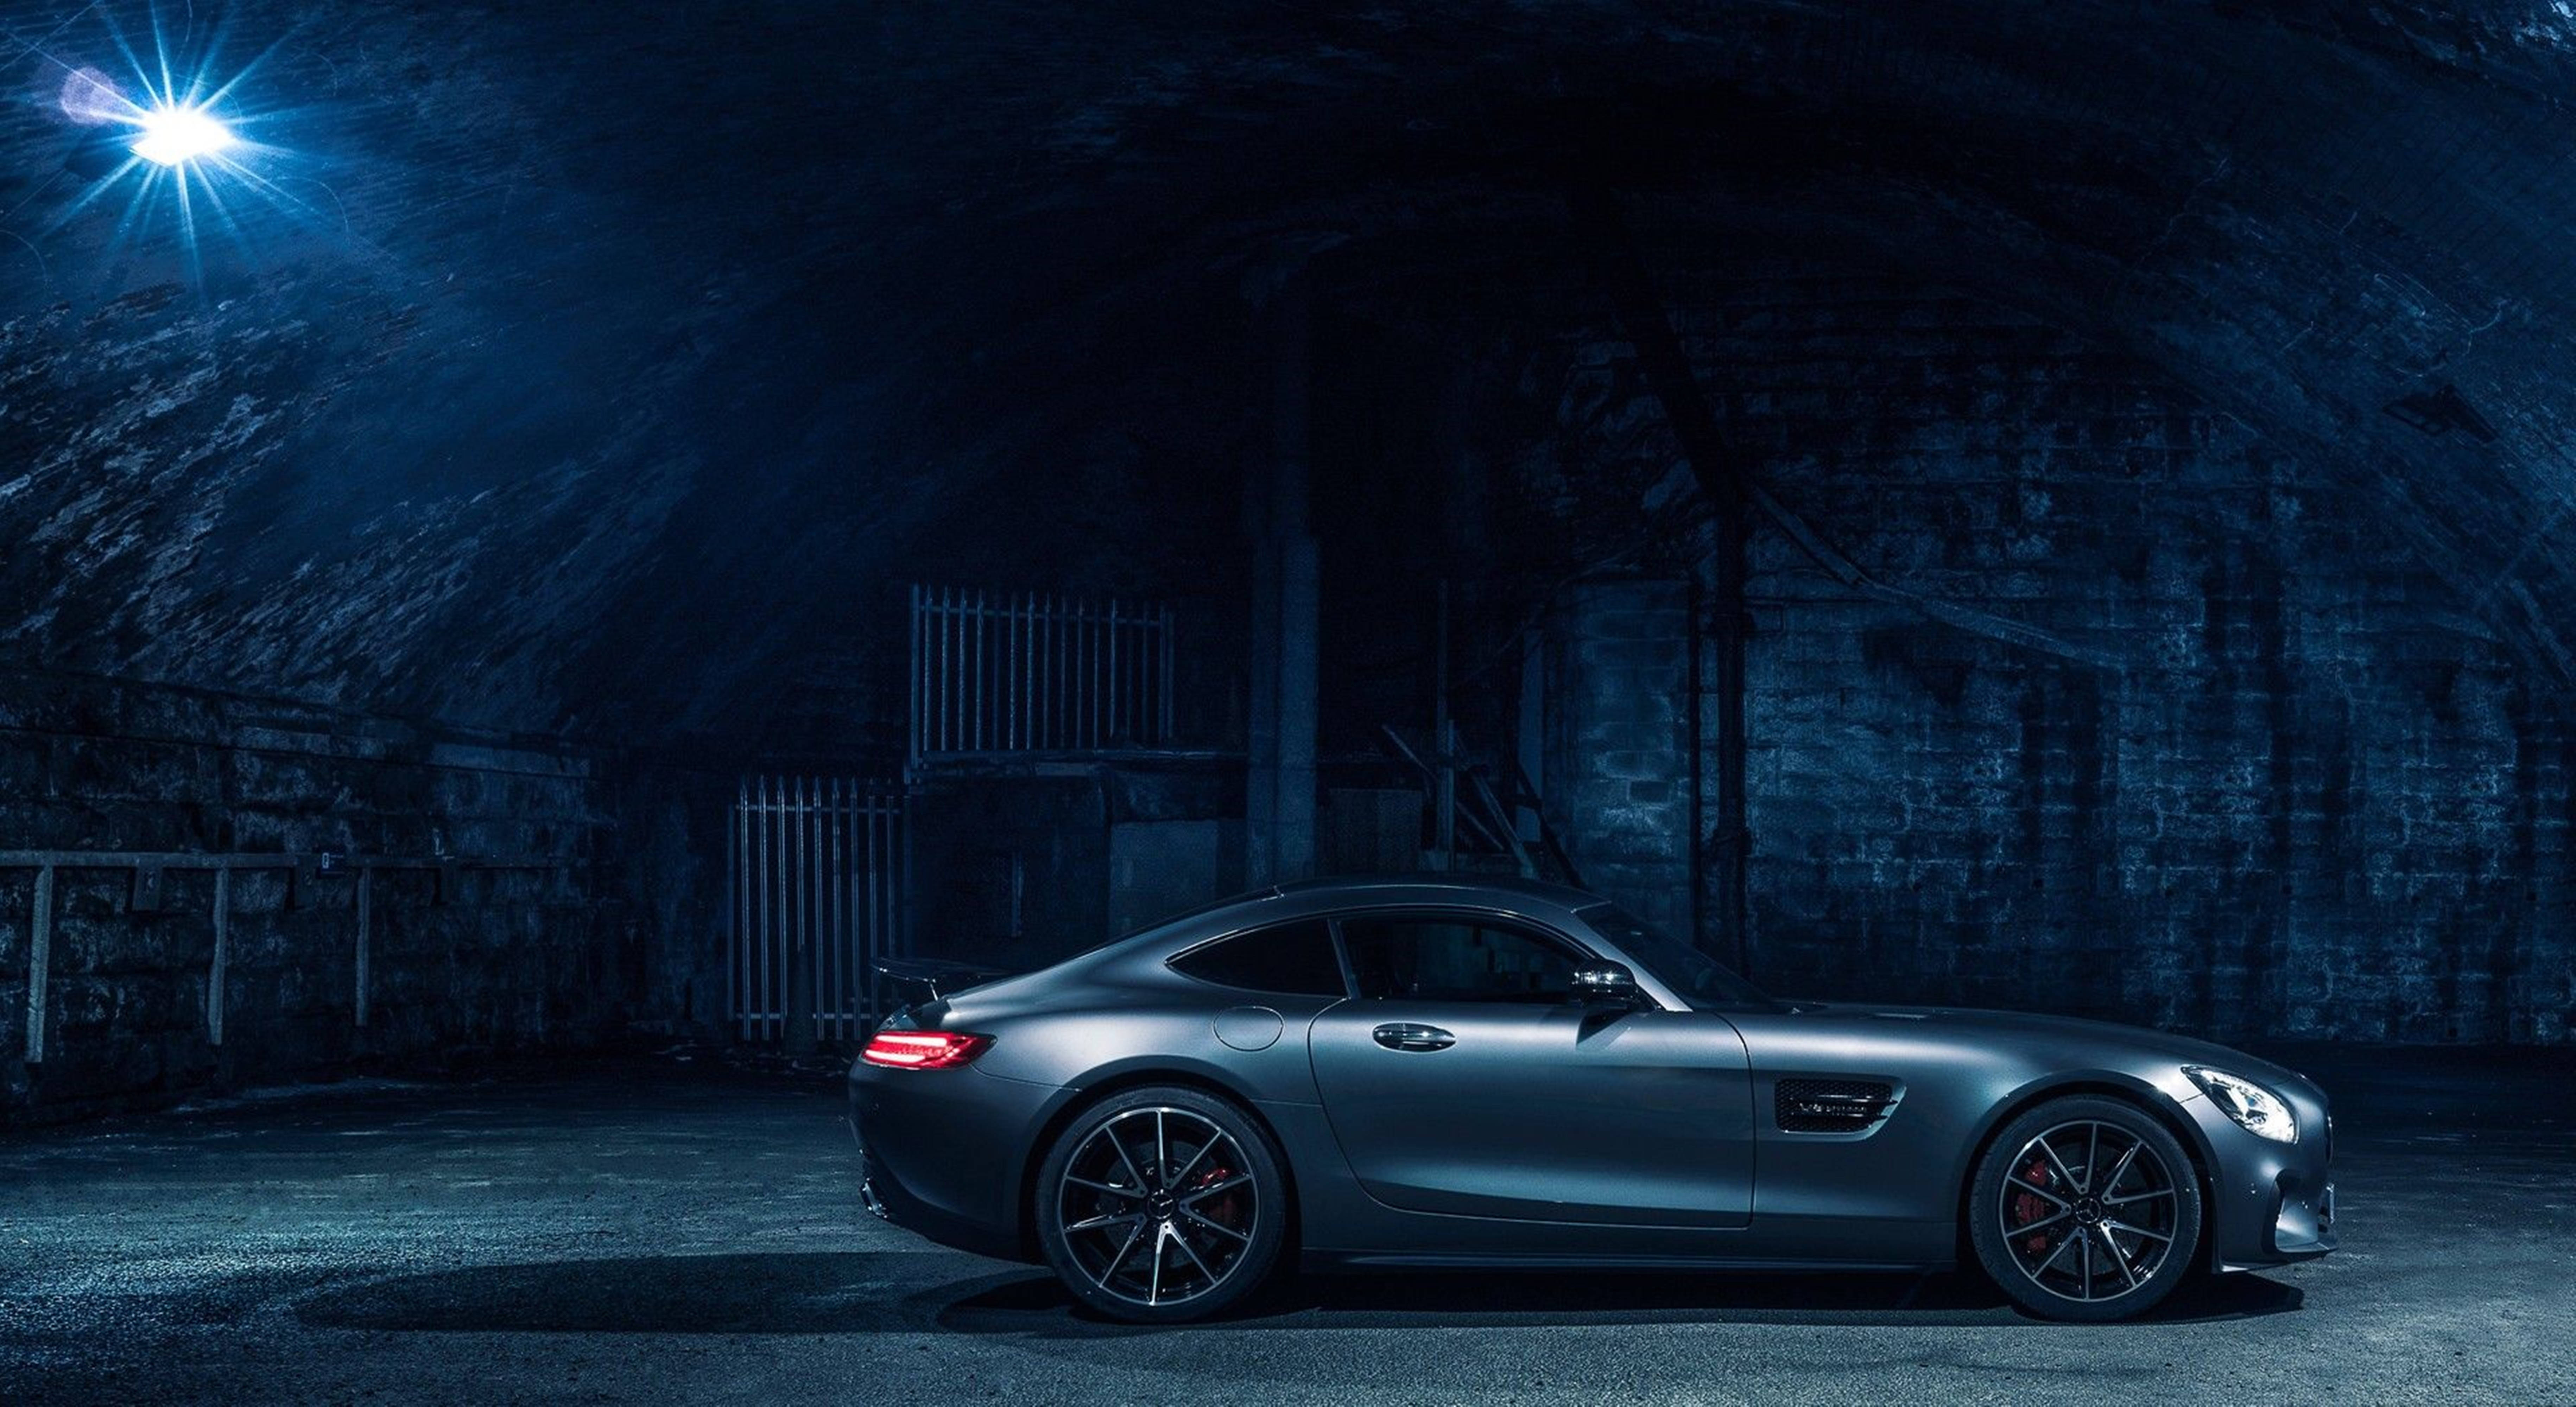 Sophisticated Mercedes Amg In 4k Resolution Displayed In An Abandoned Warehouse Setting